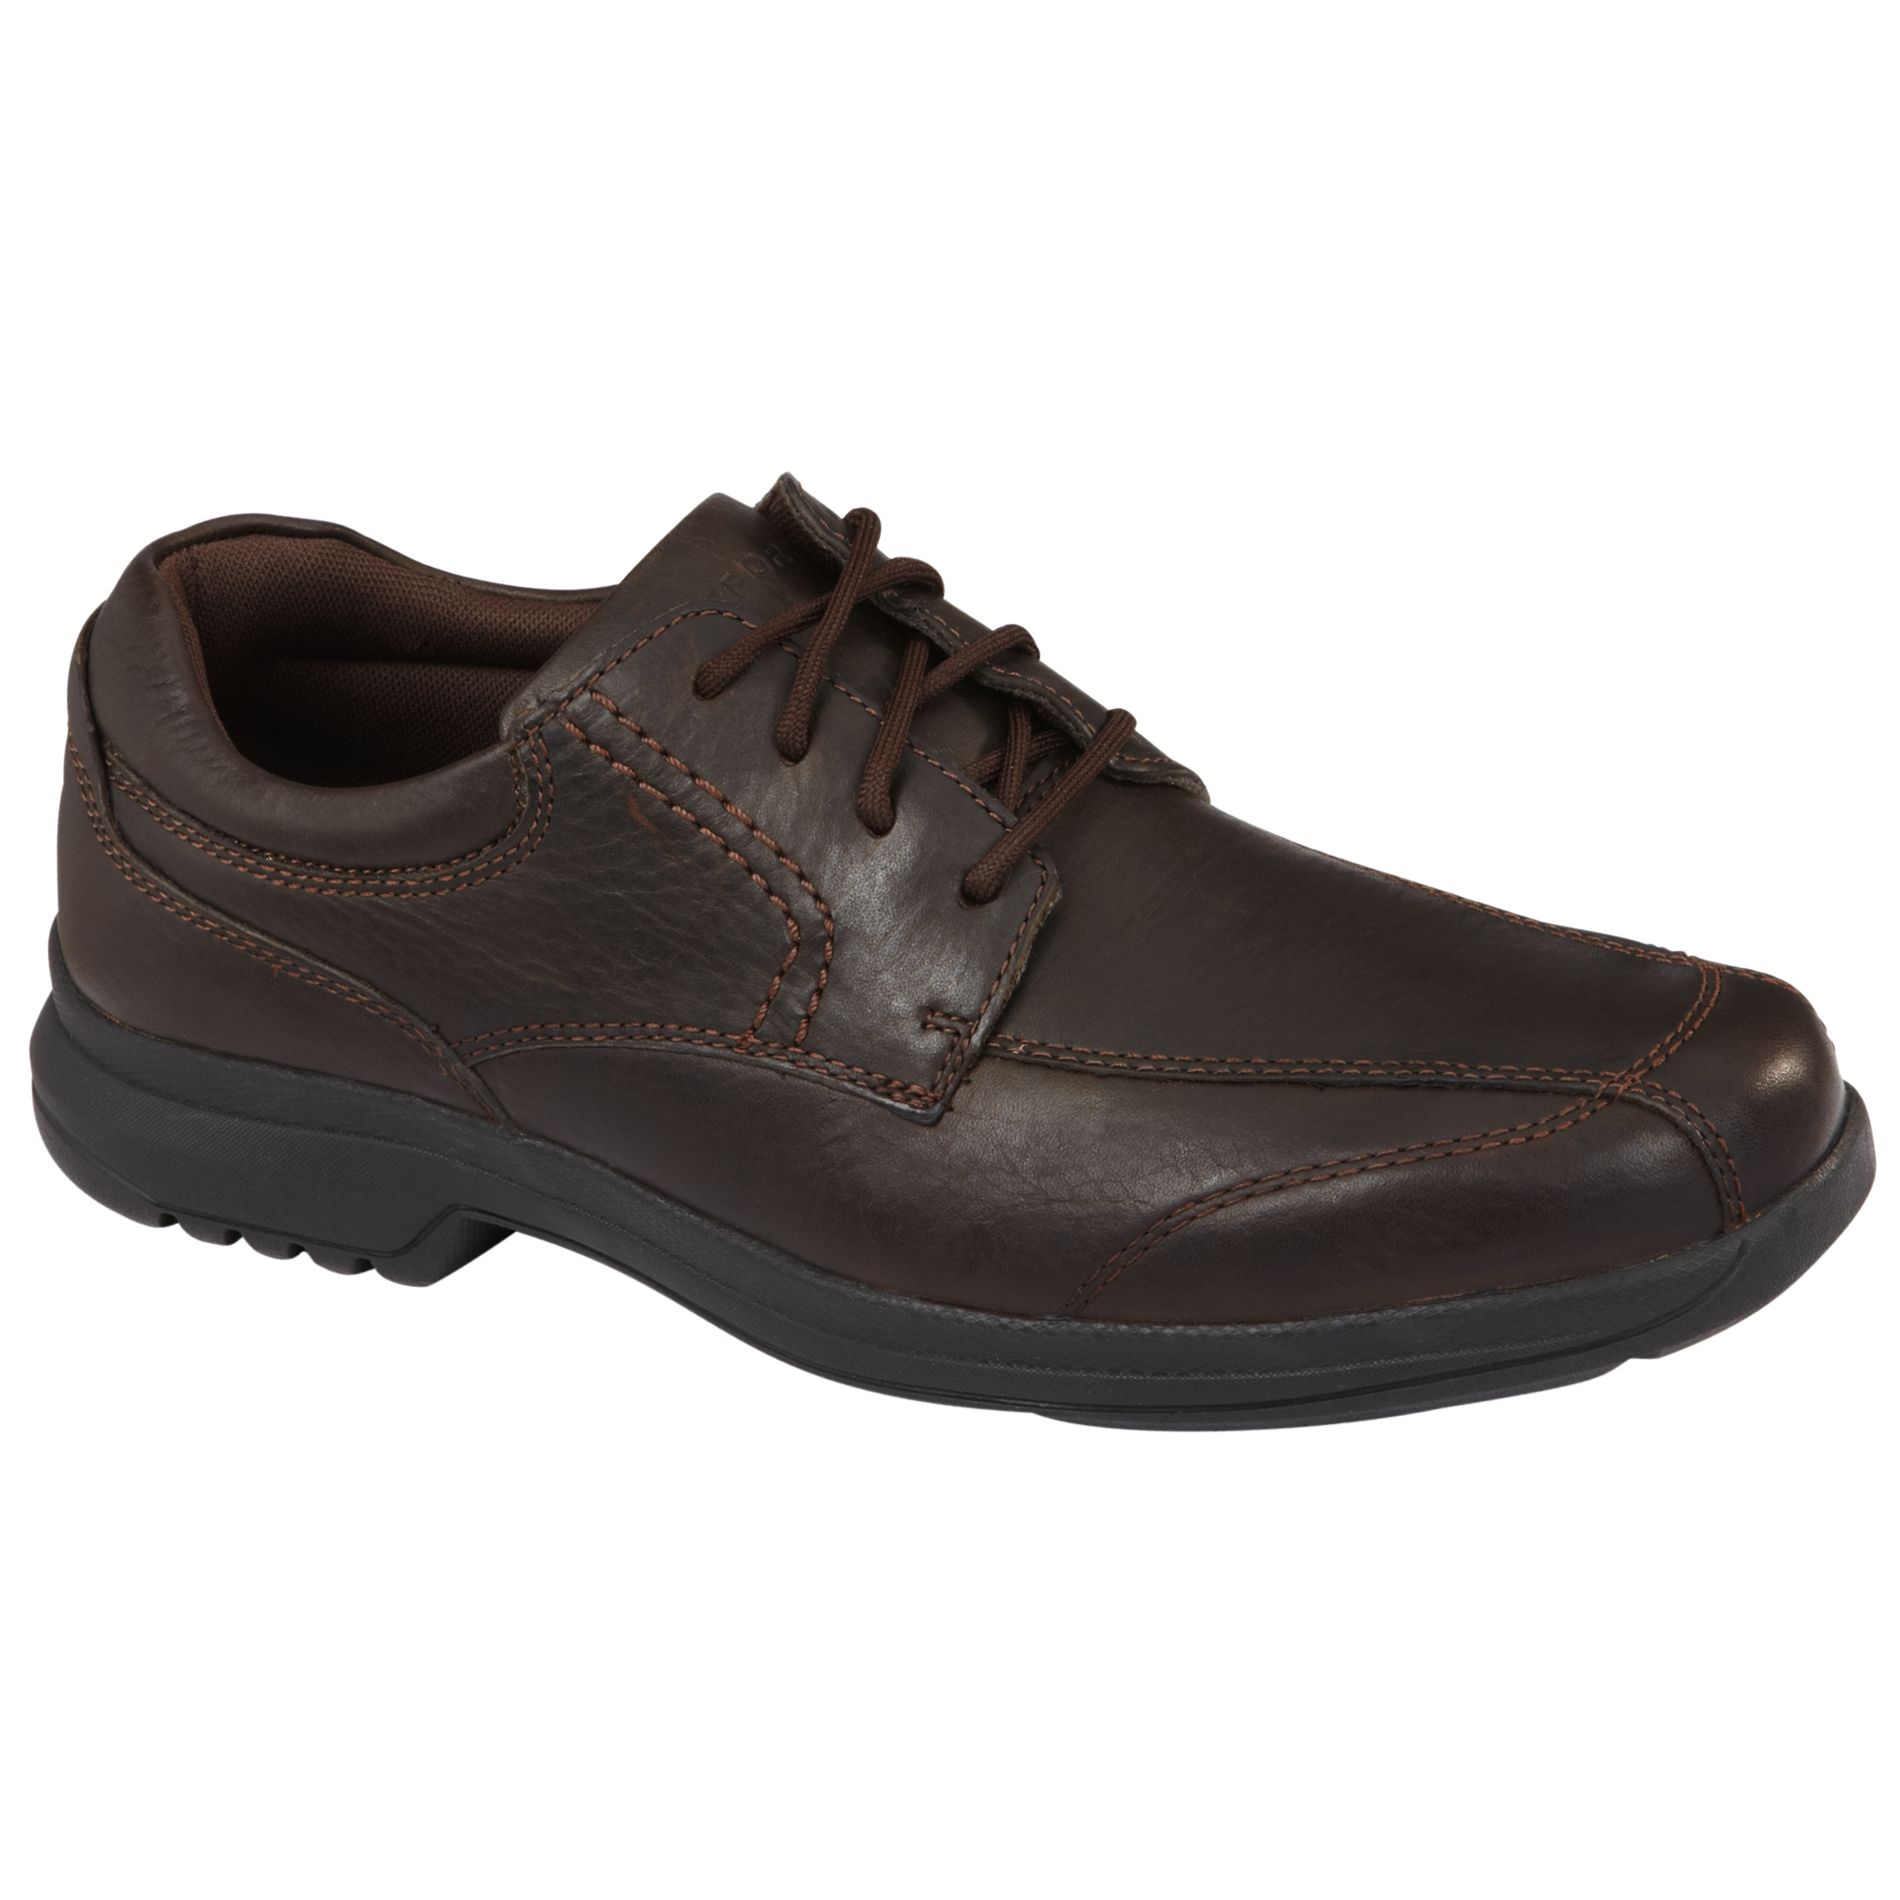 Rockport Men's Casual Shoe Westerlund - Wide Avail - Brown - Shoes ...